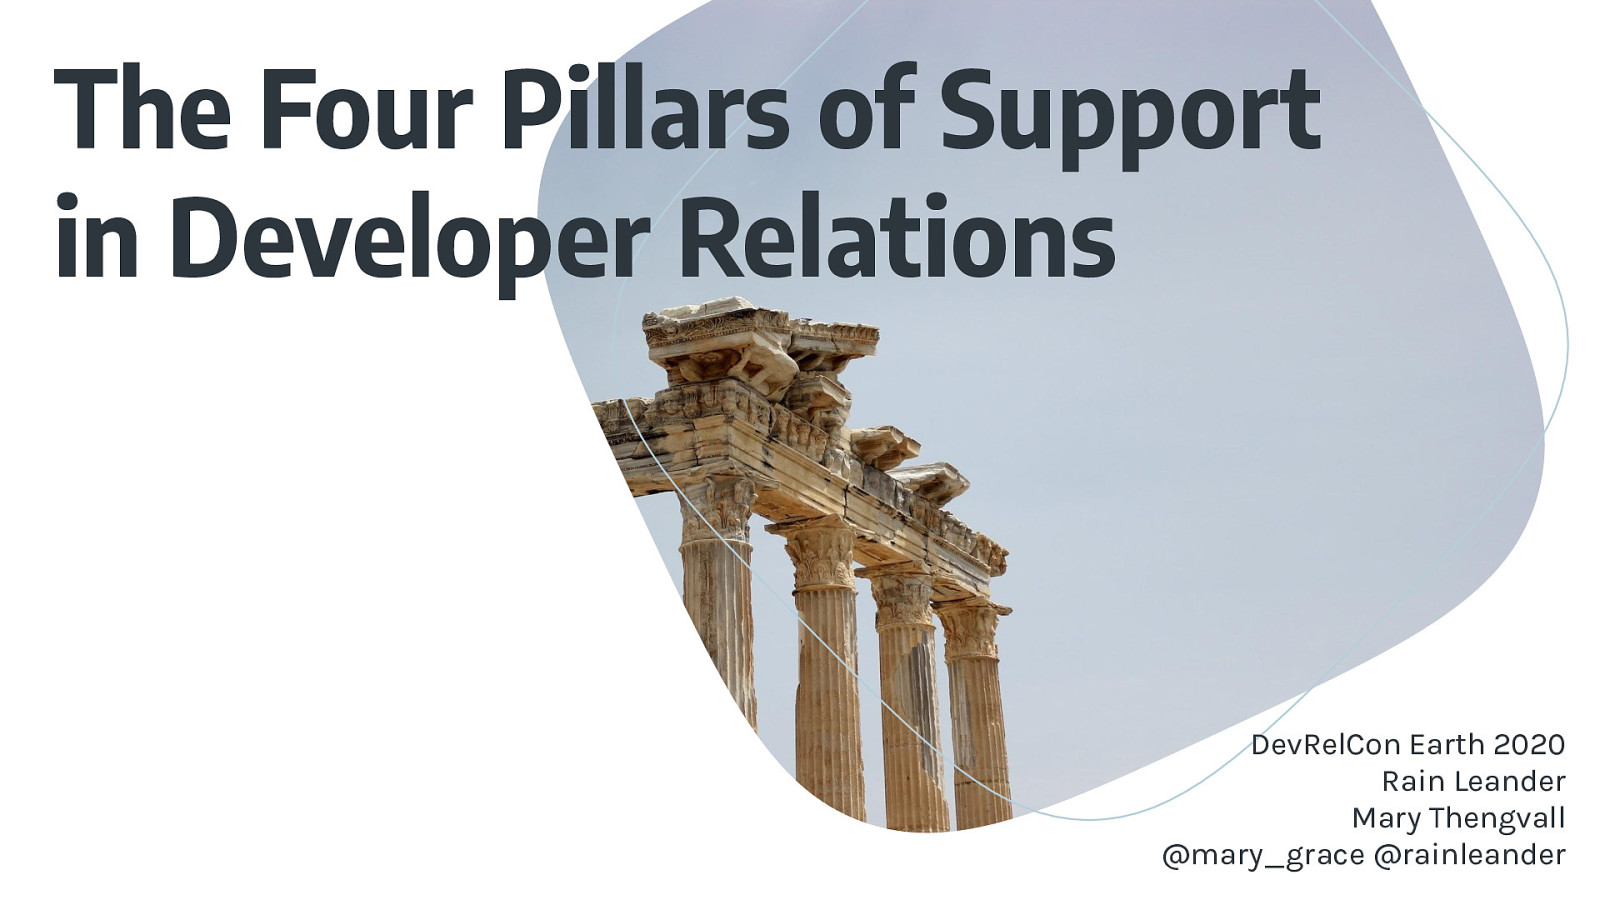 The Four Pillars of Support in Developer Relations